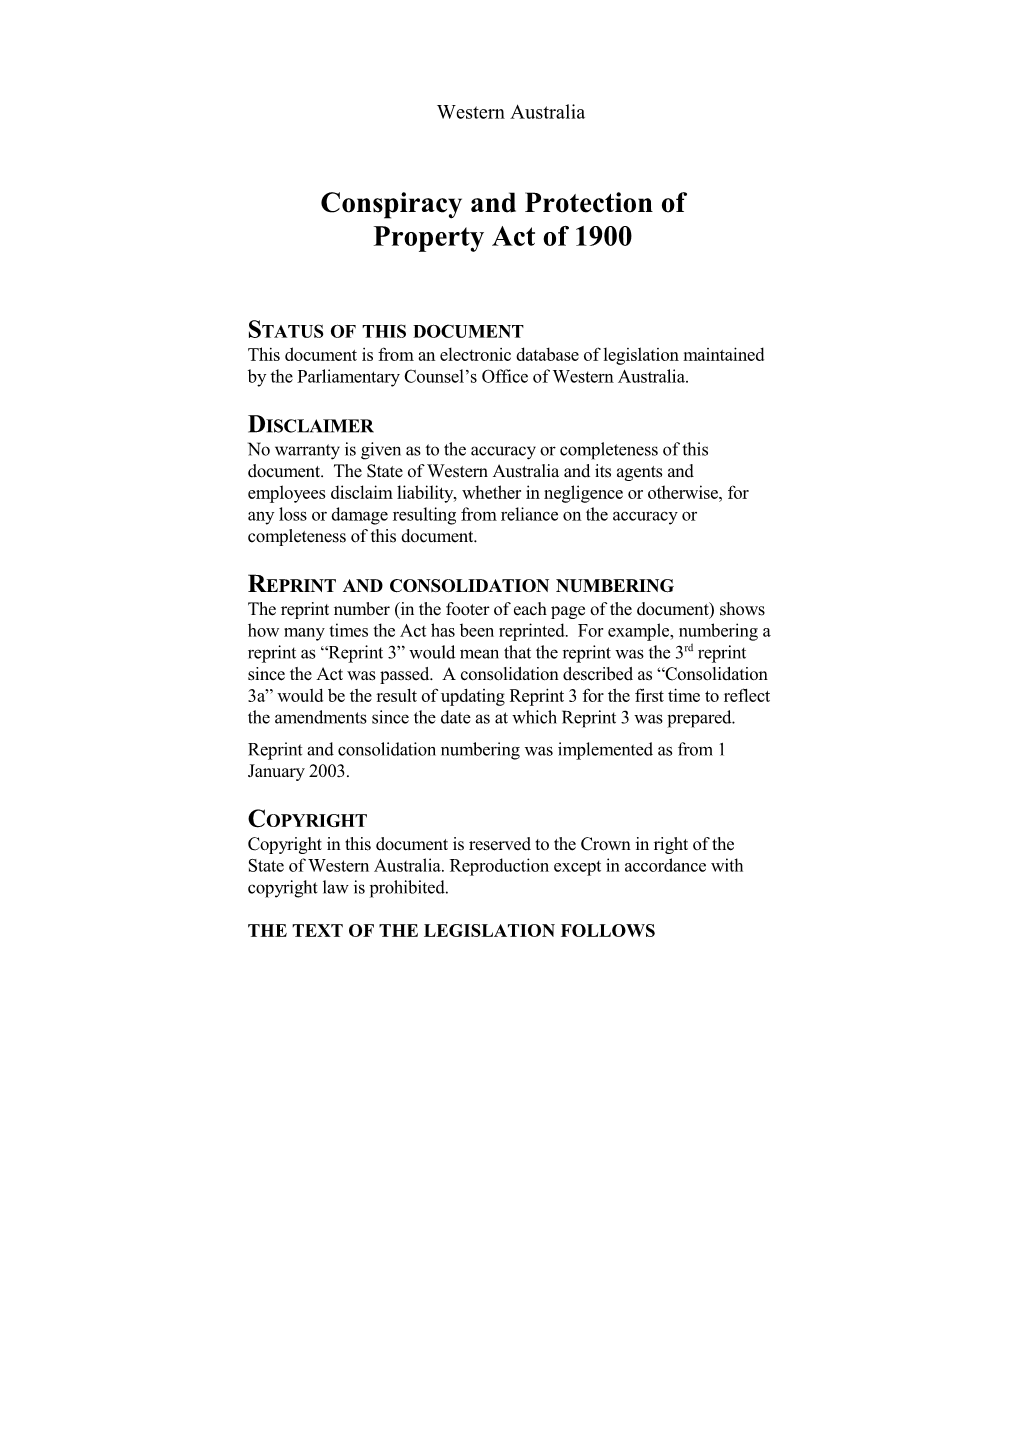 Conspiracy and Protection of Property Act of 1900